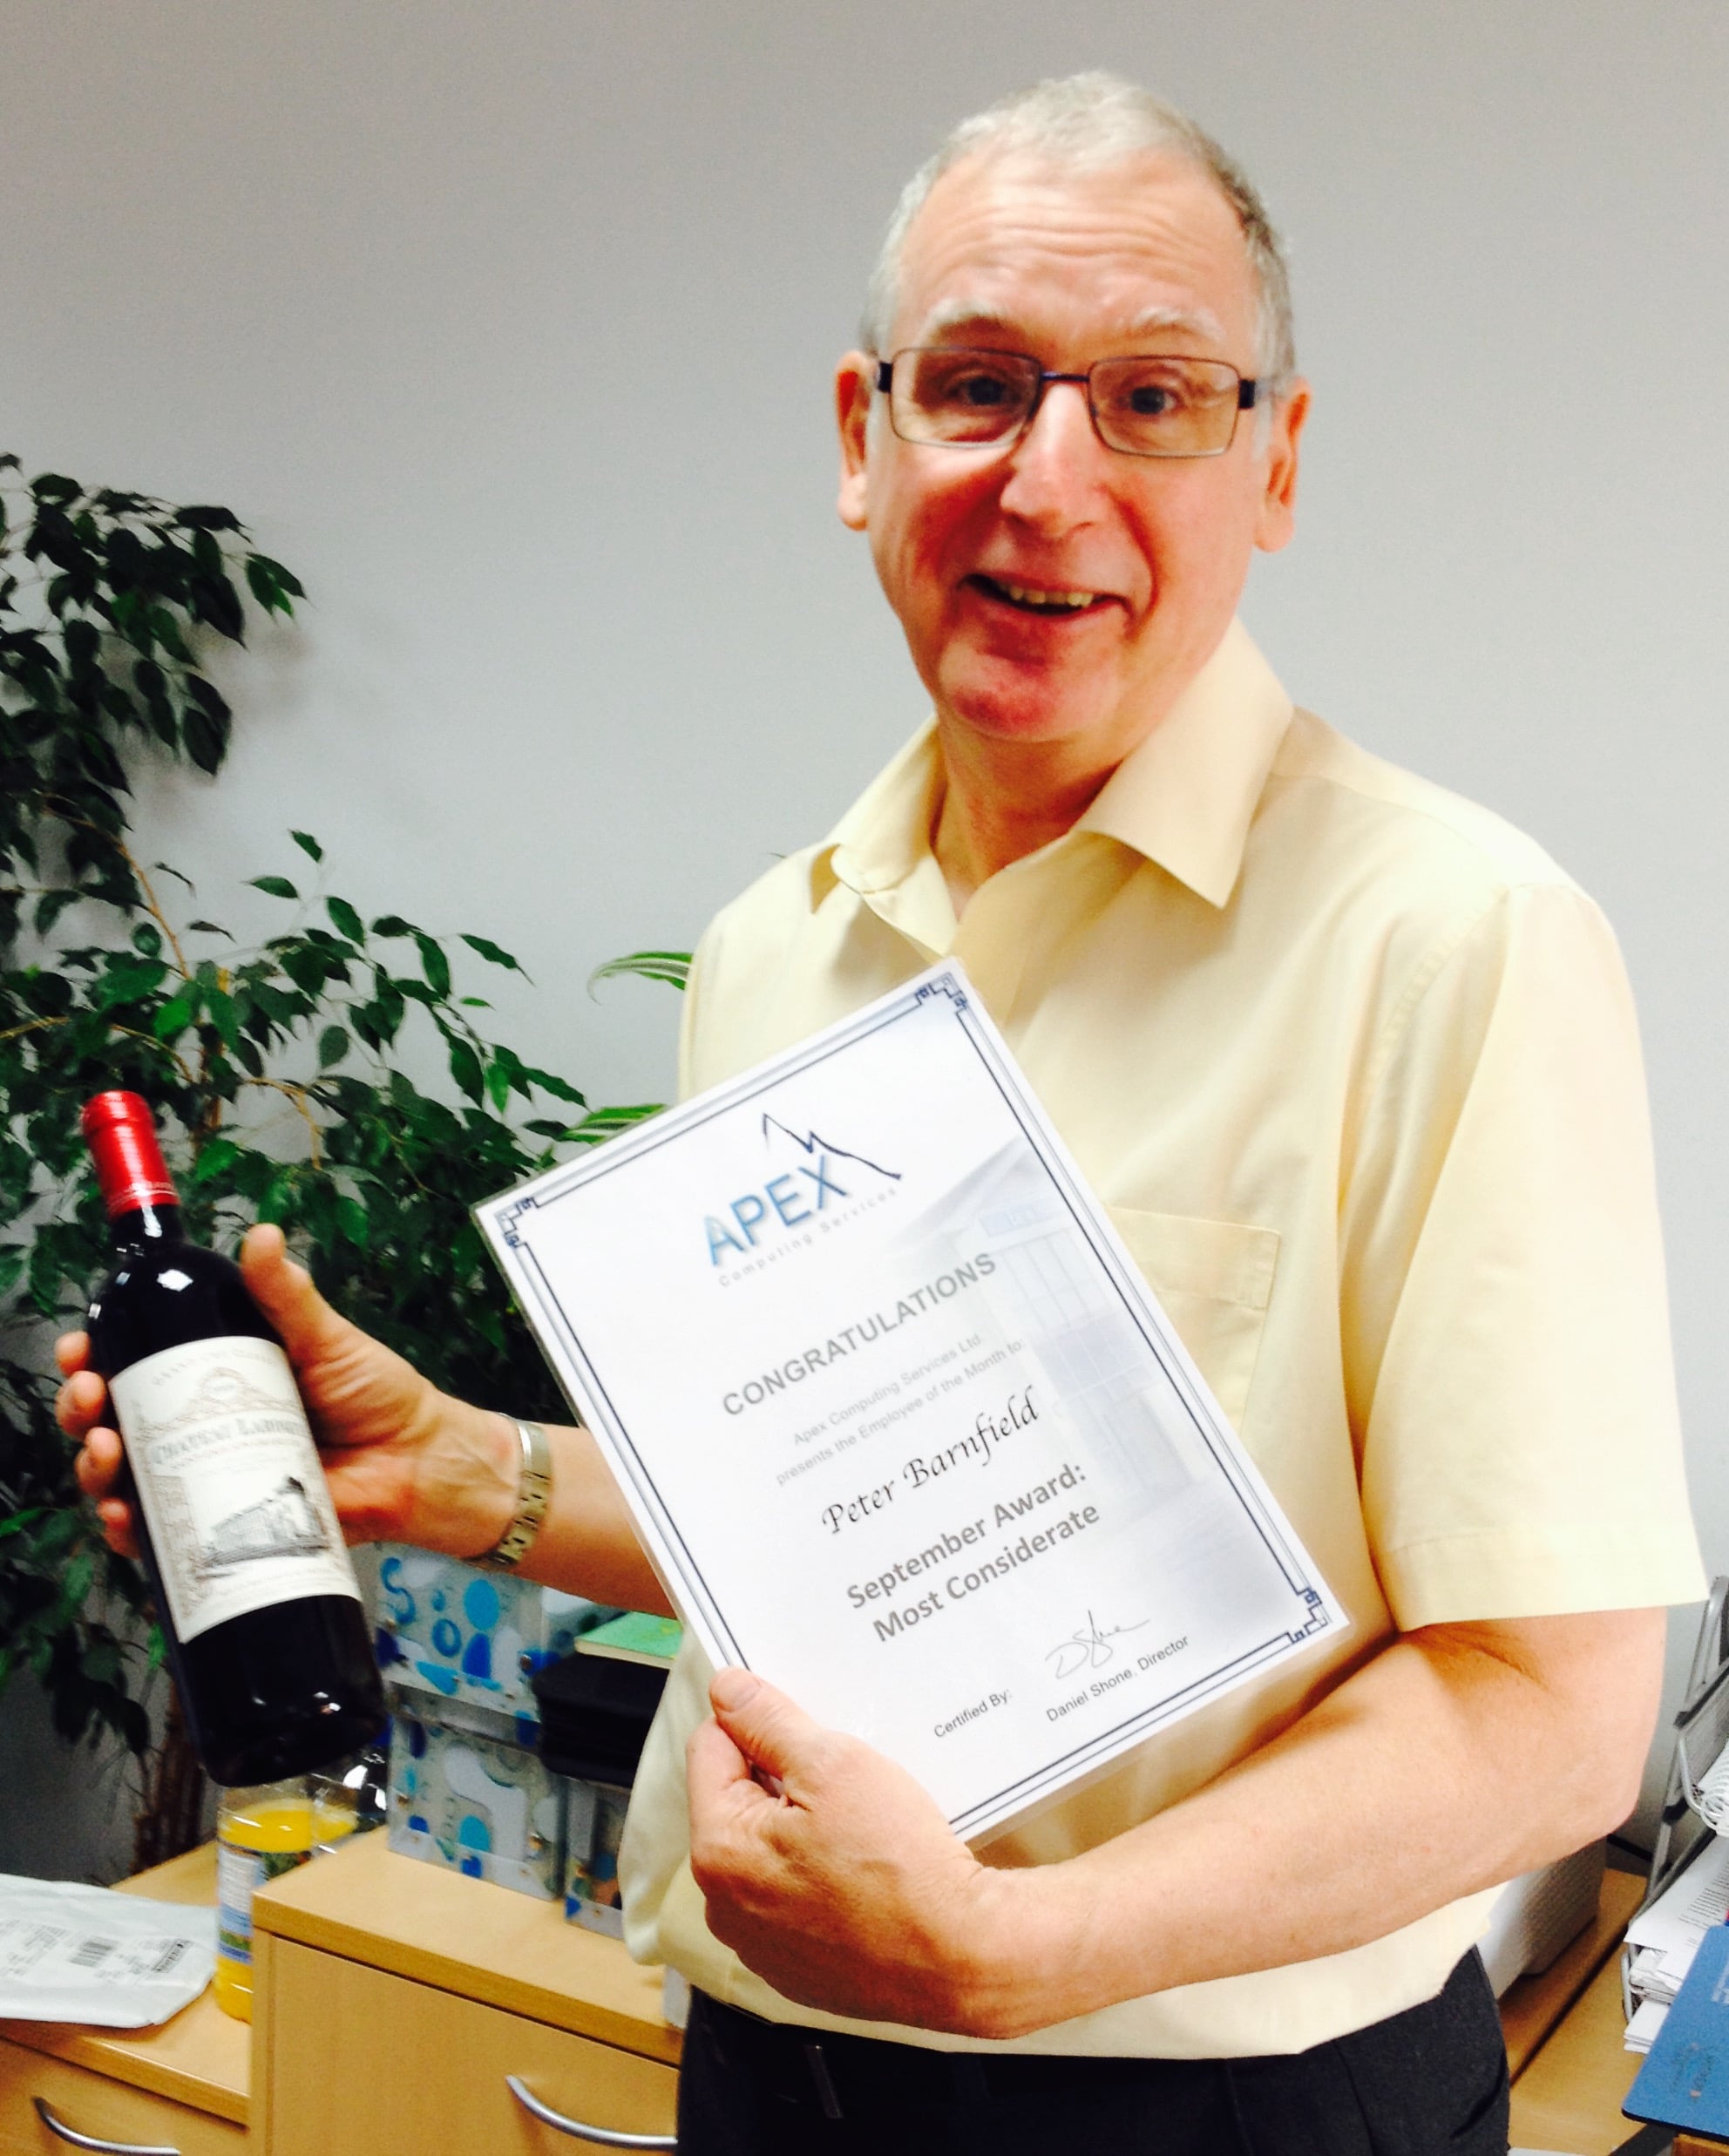 Peter Barnfield wins the September 'Employee of the Month' Award!